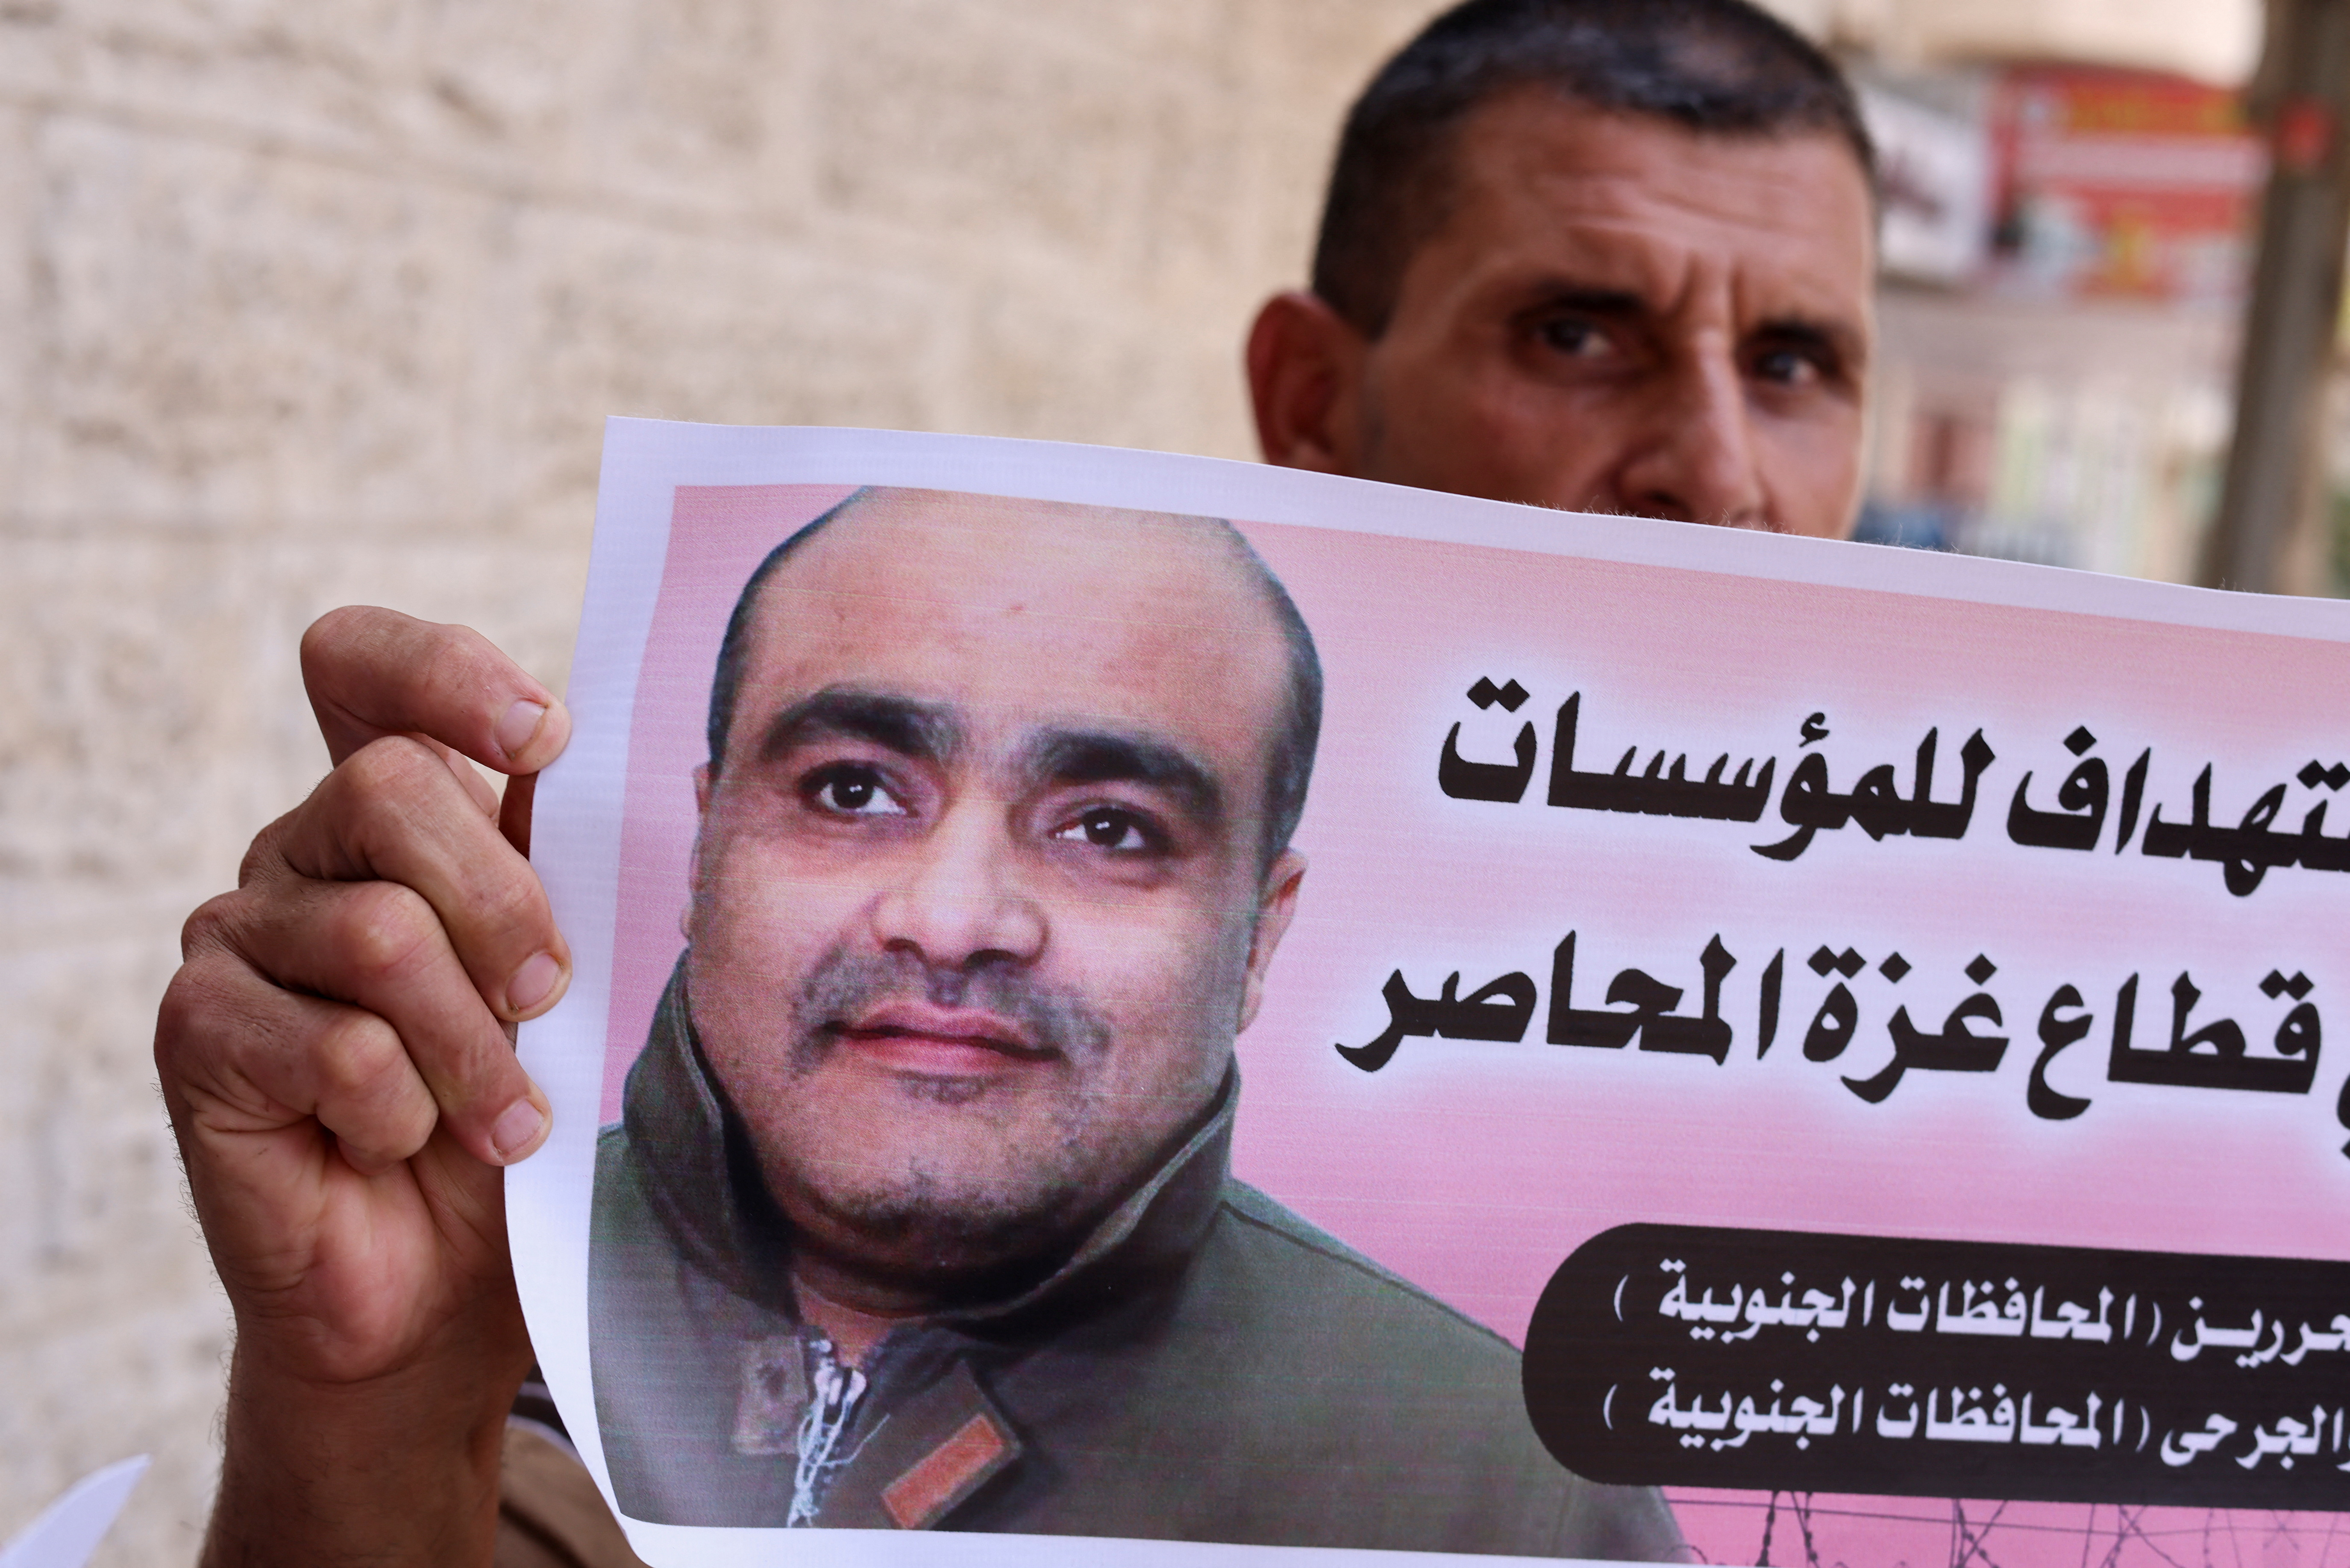 A man holds a picture of Mohammad El Halabi, during a solidarity gathering following an Israeli court decision to sentence him for 12 years, outside the office of the International Committee of the Red Cross in Gaza City